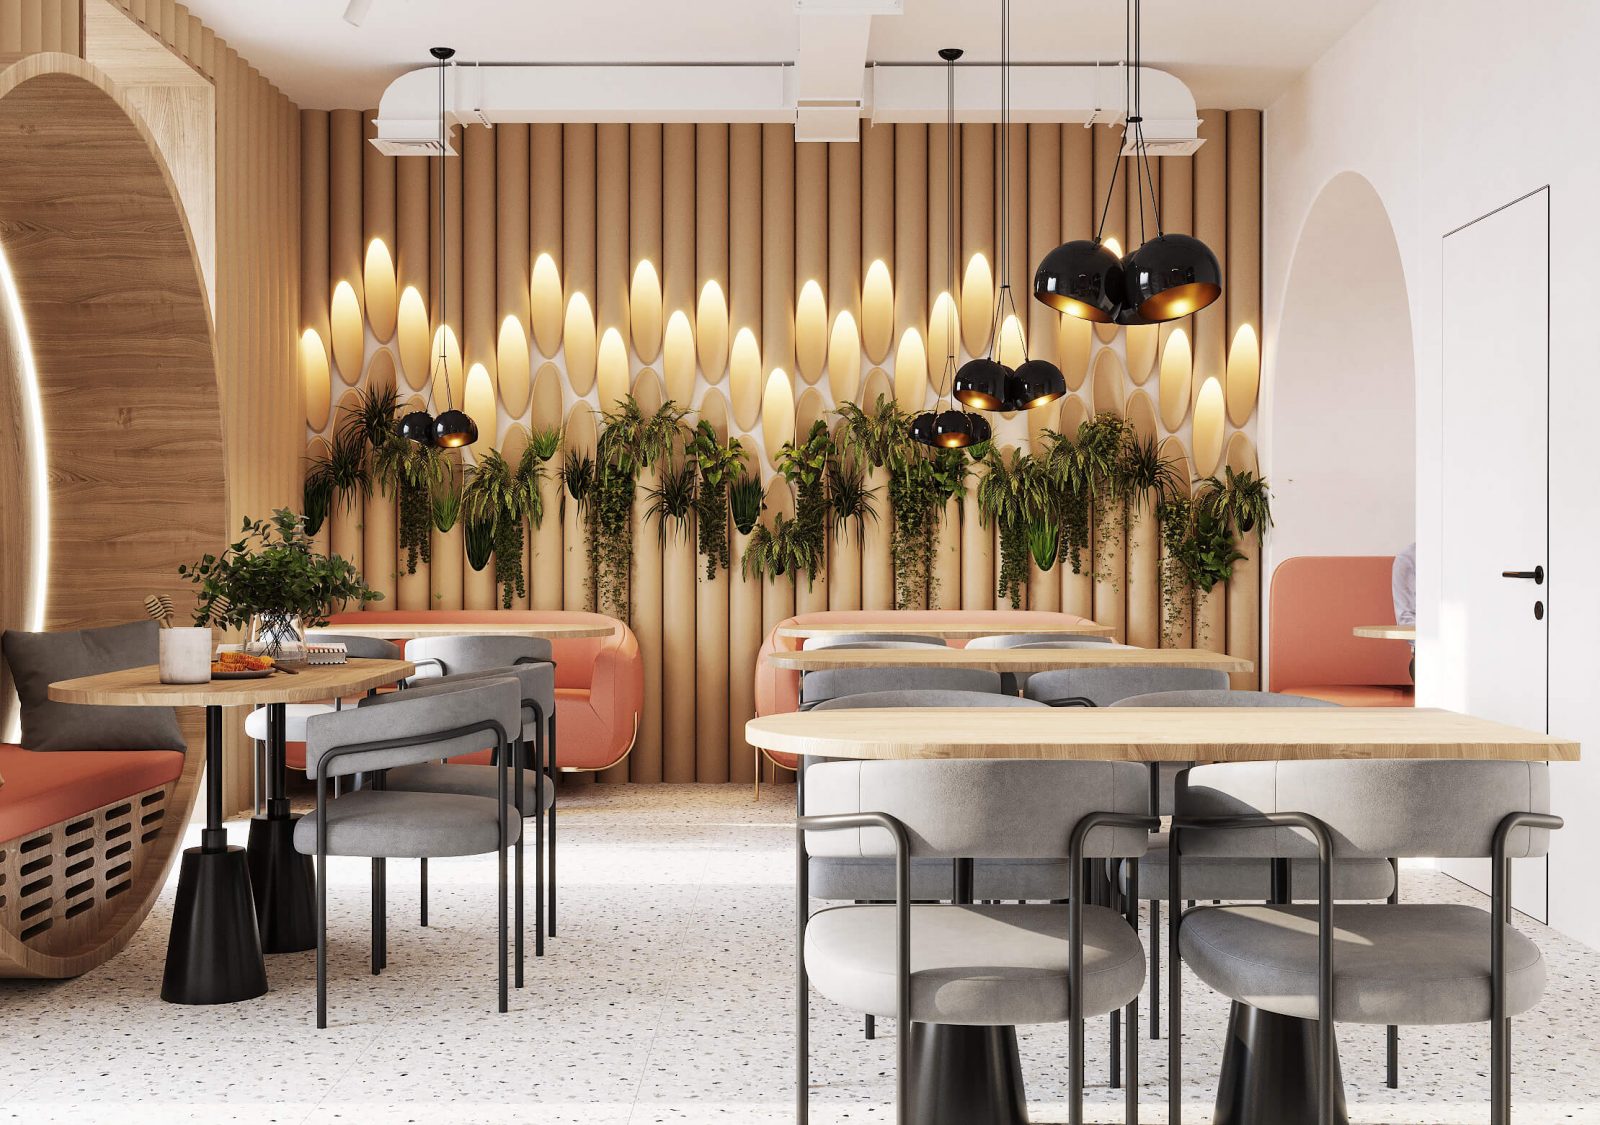 Lighting design. As an element of attracting visitors to a restaurant 10